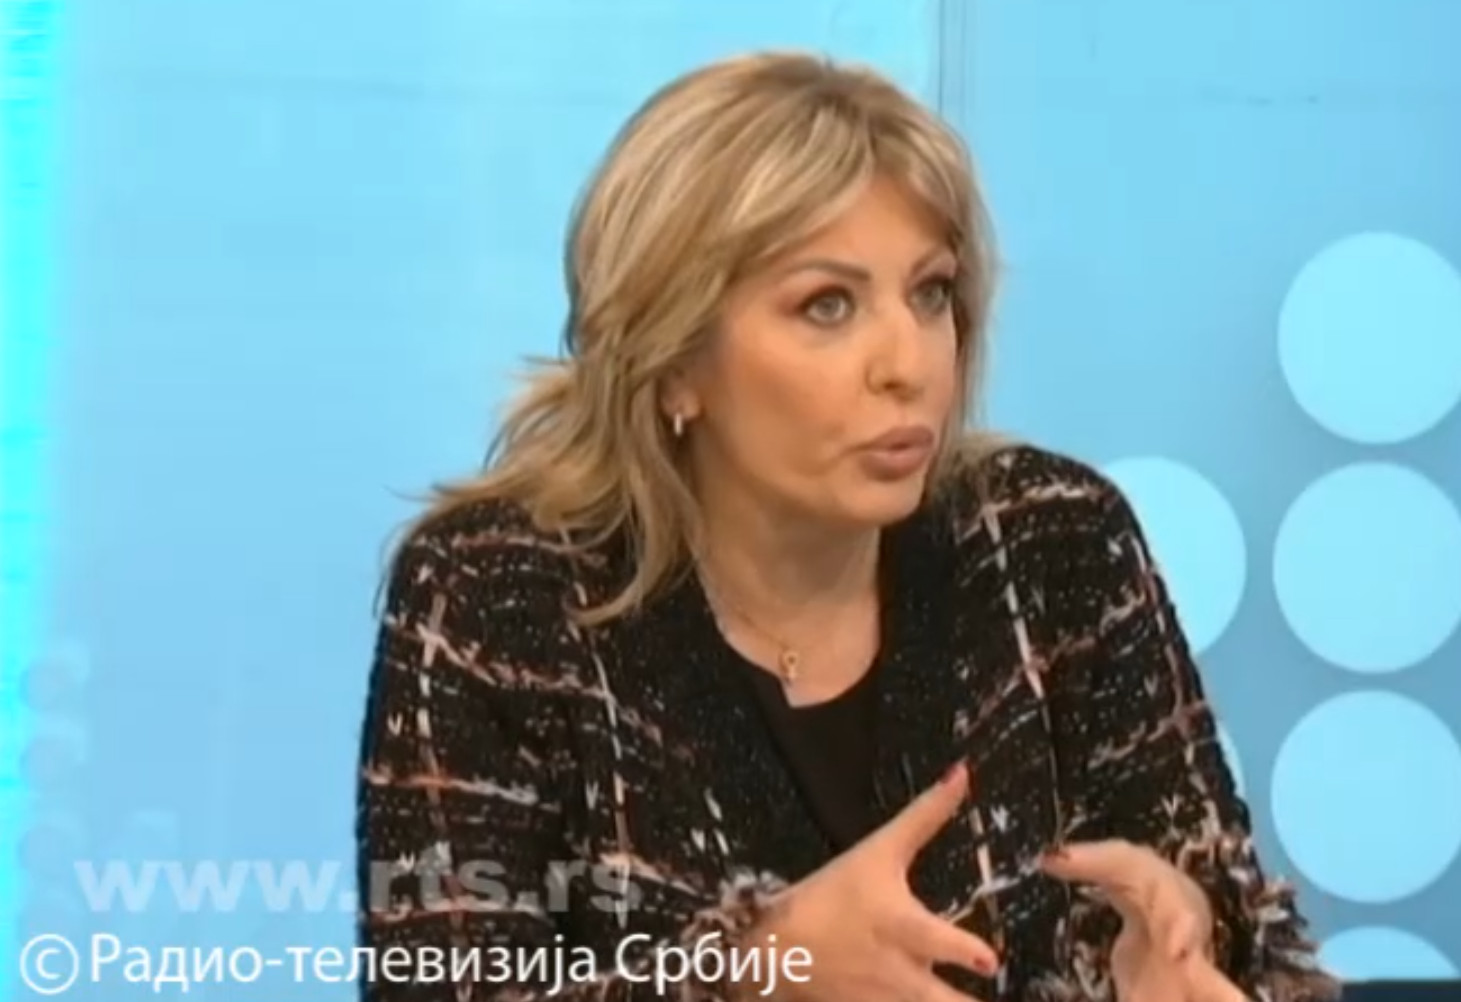 J. Joksimović: There are no short-cuts in the new methodology, and neither did we ask for them 